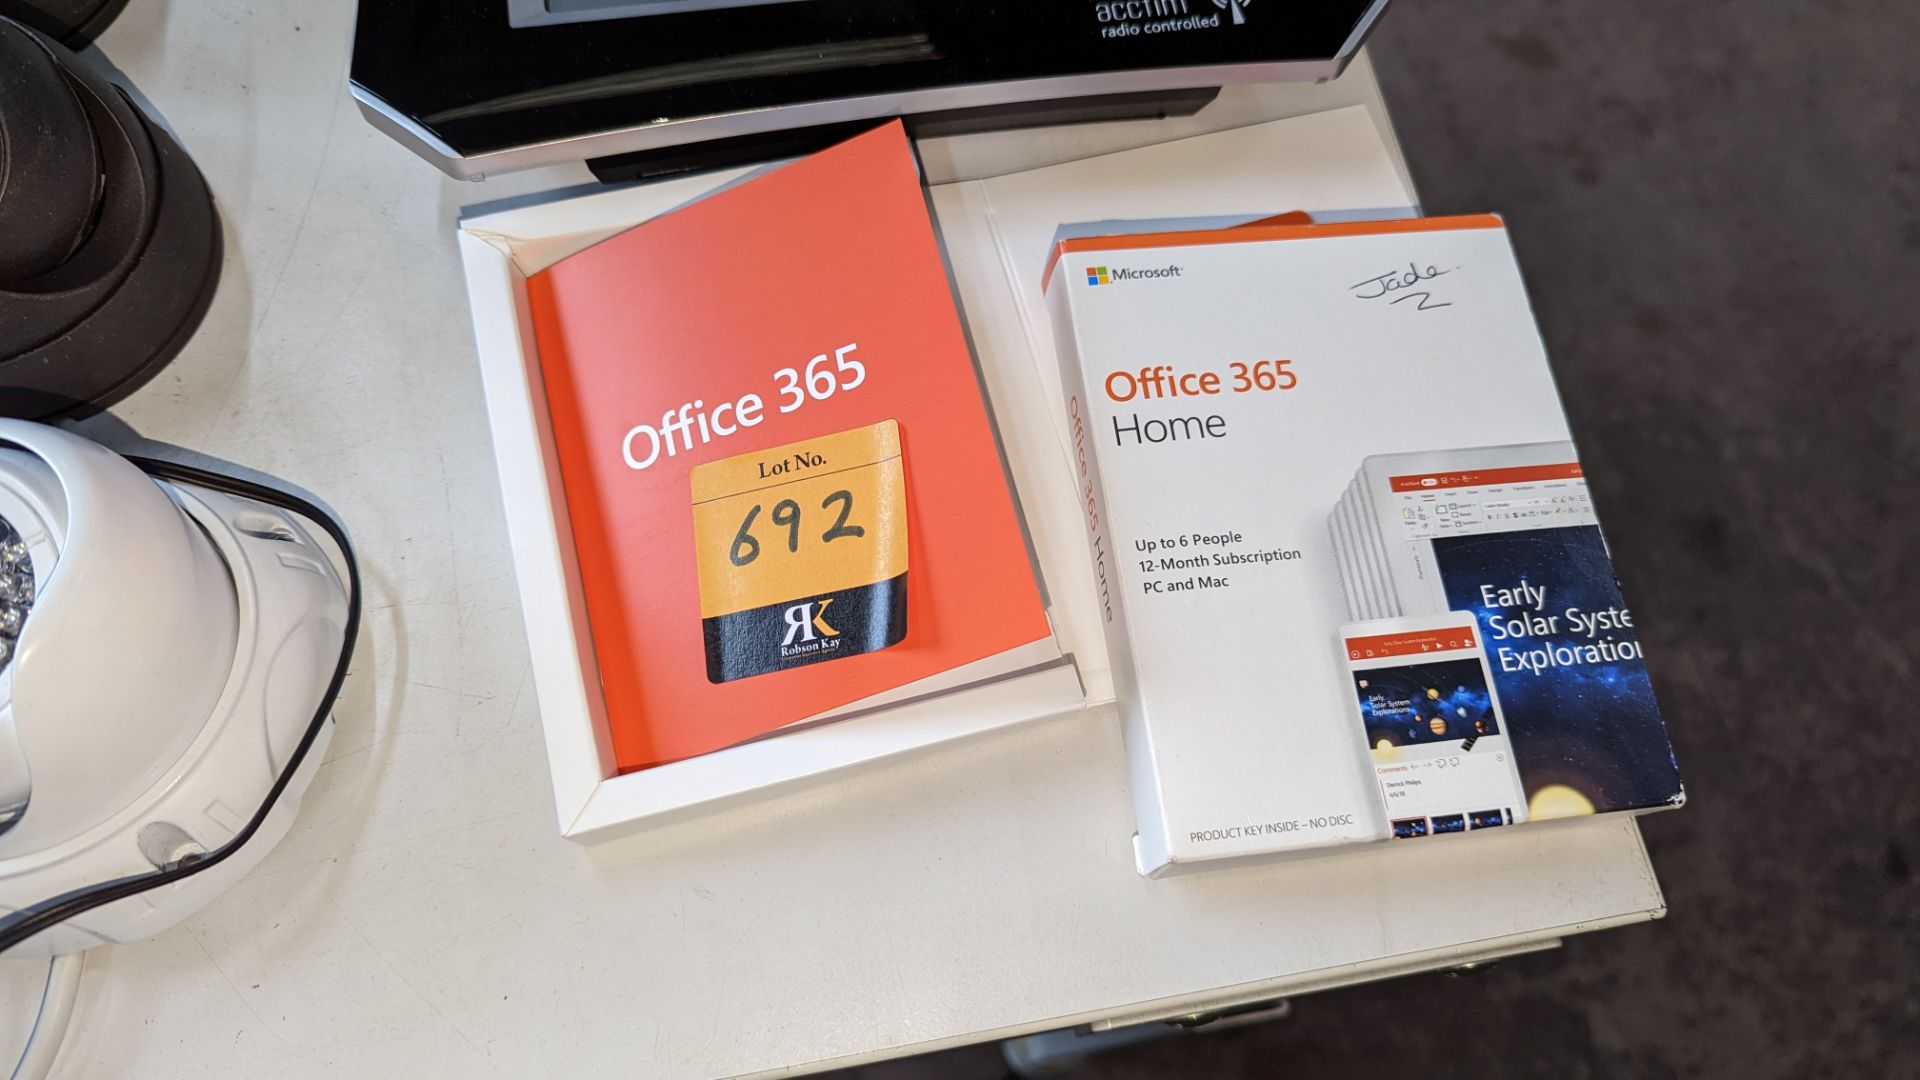 Microsoft Office 365 software pack - Image 2 of 5